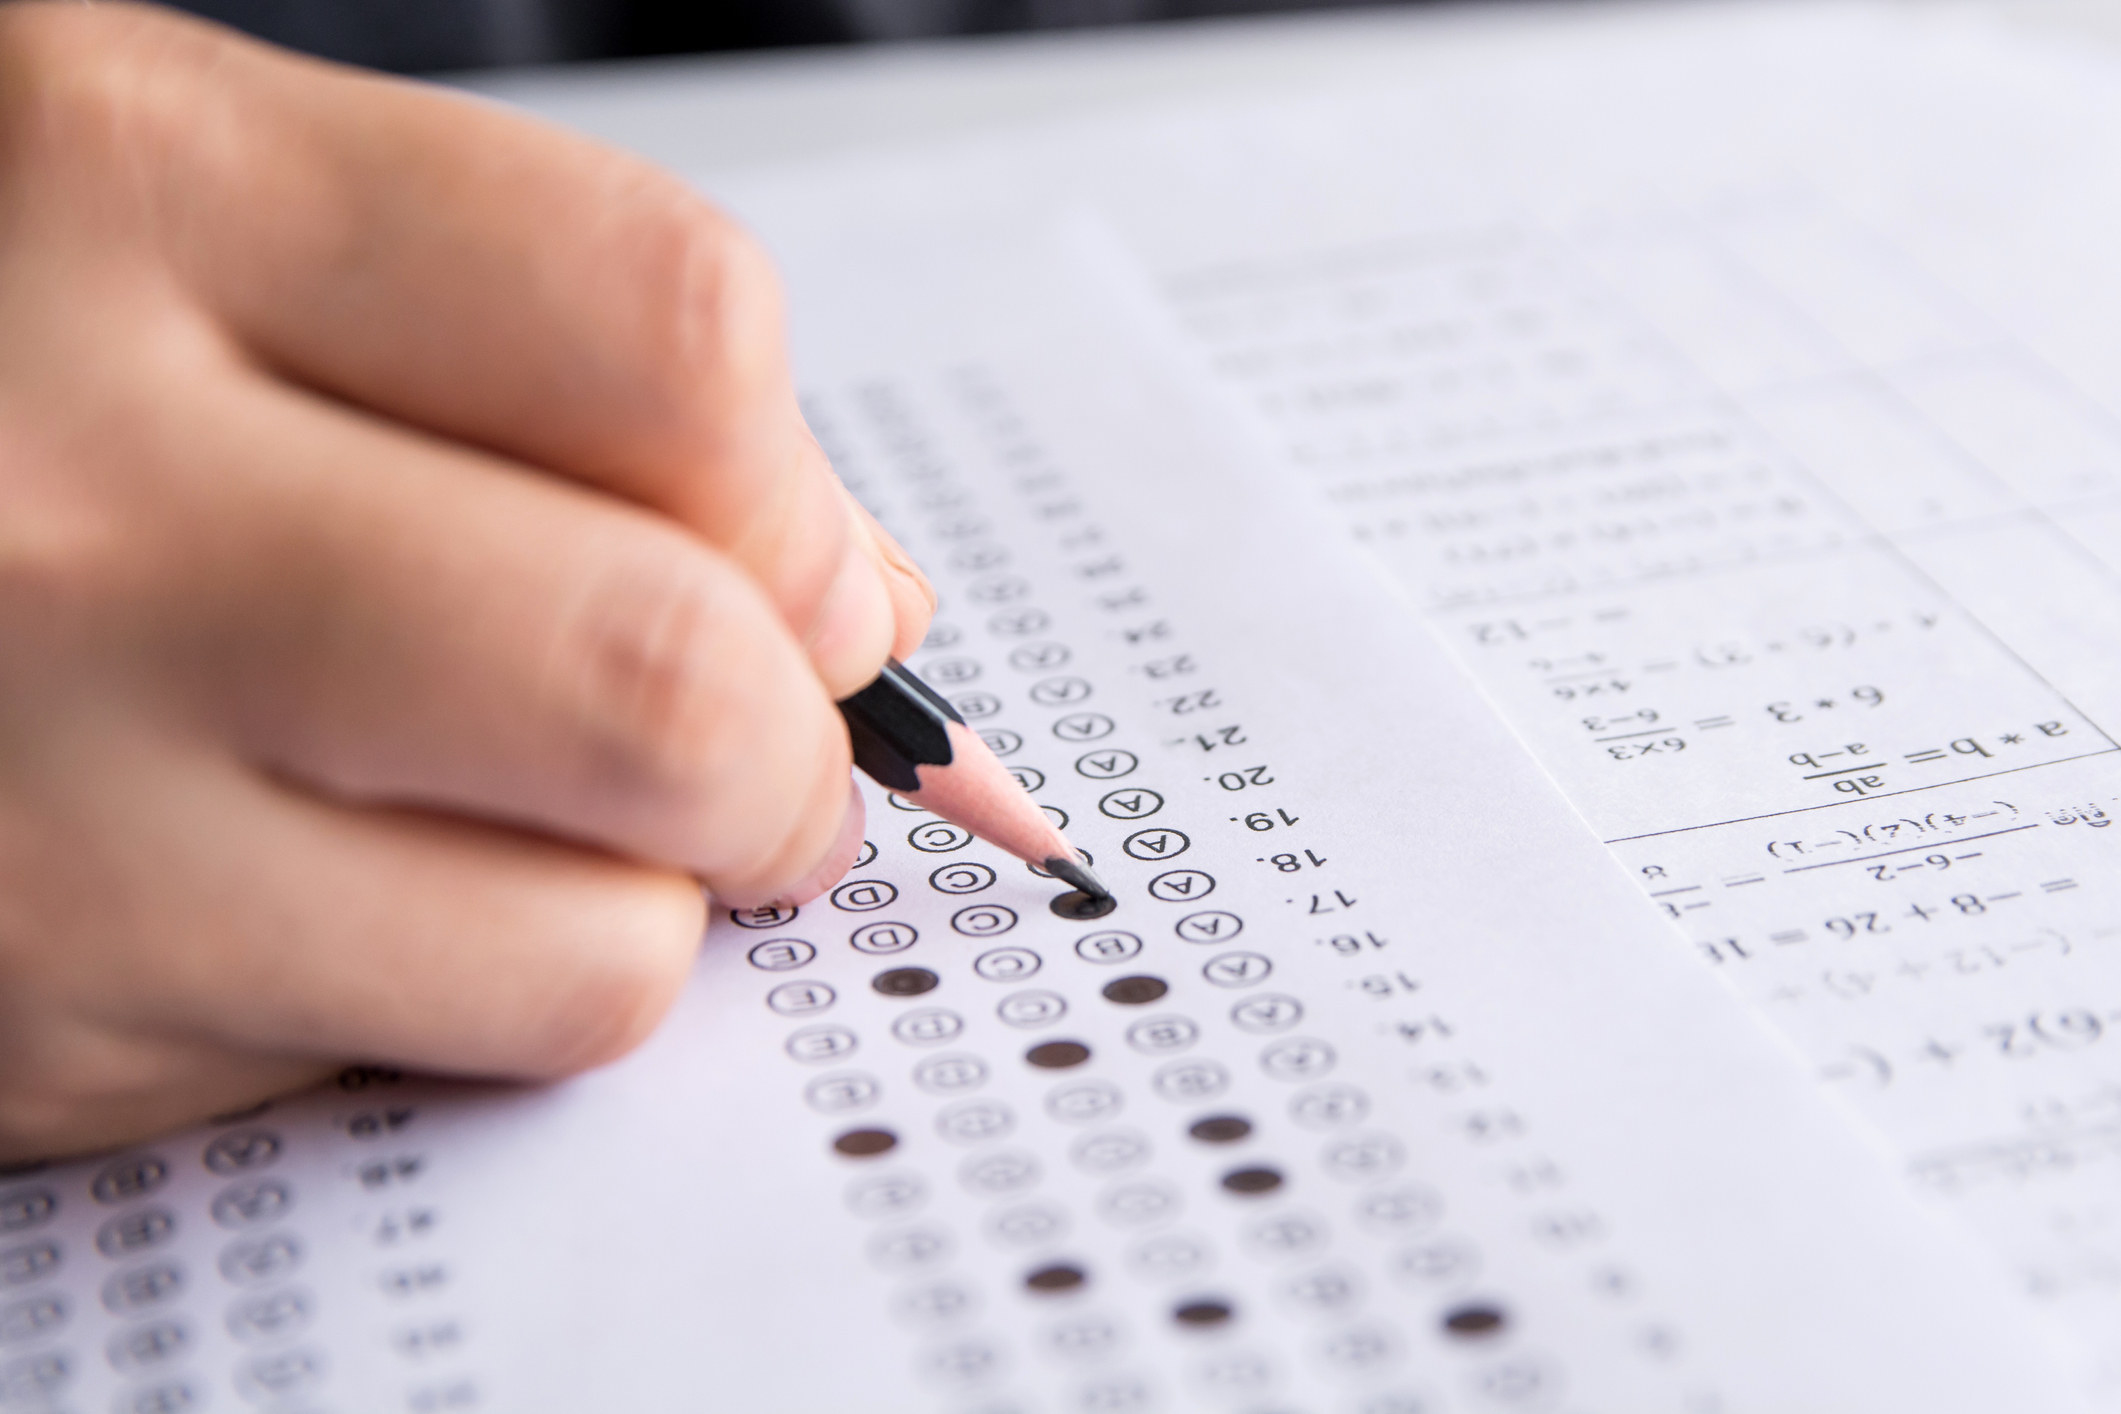 A student fills in answers for a multiple-choice exam